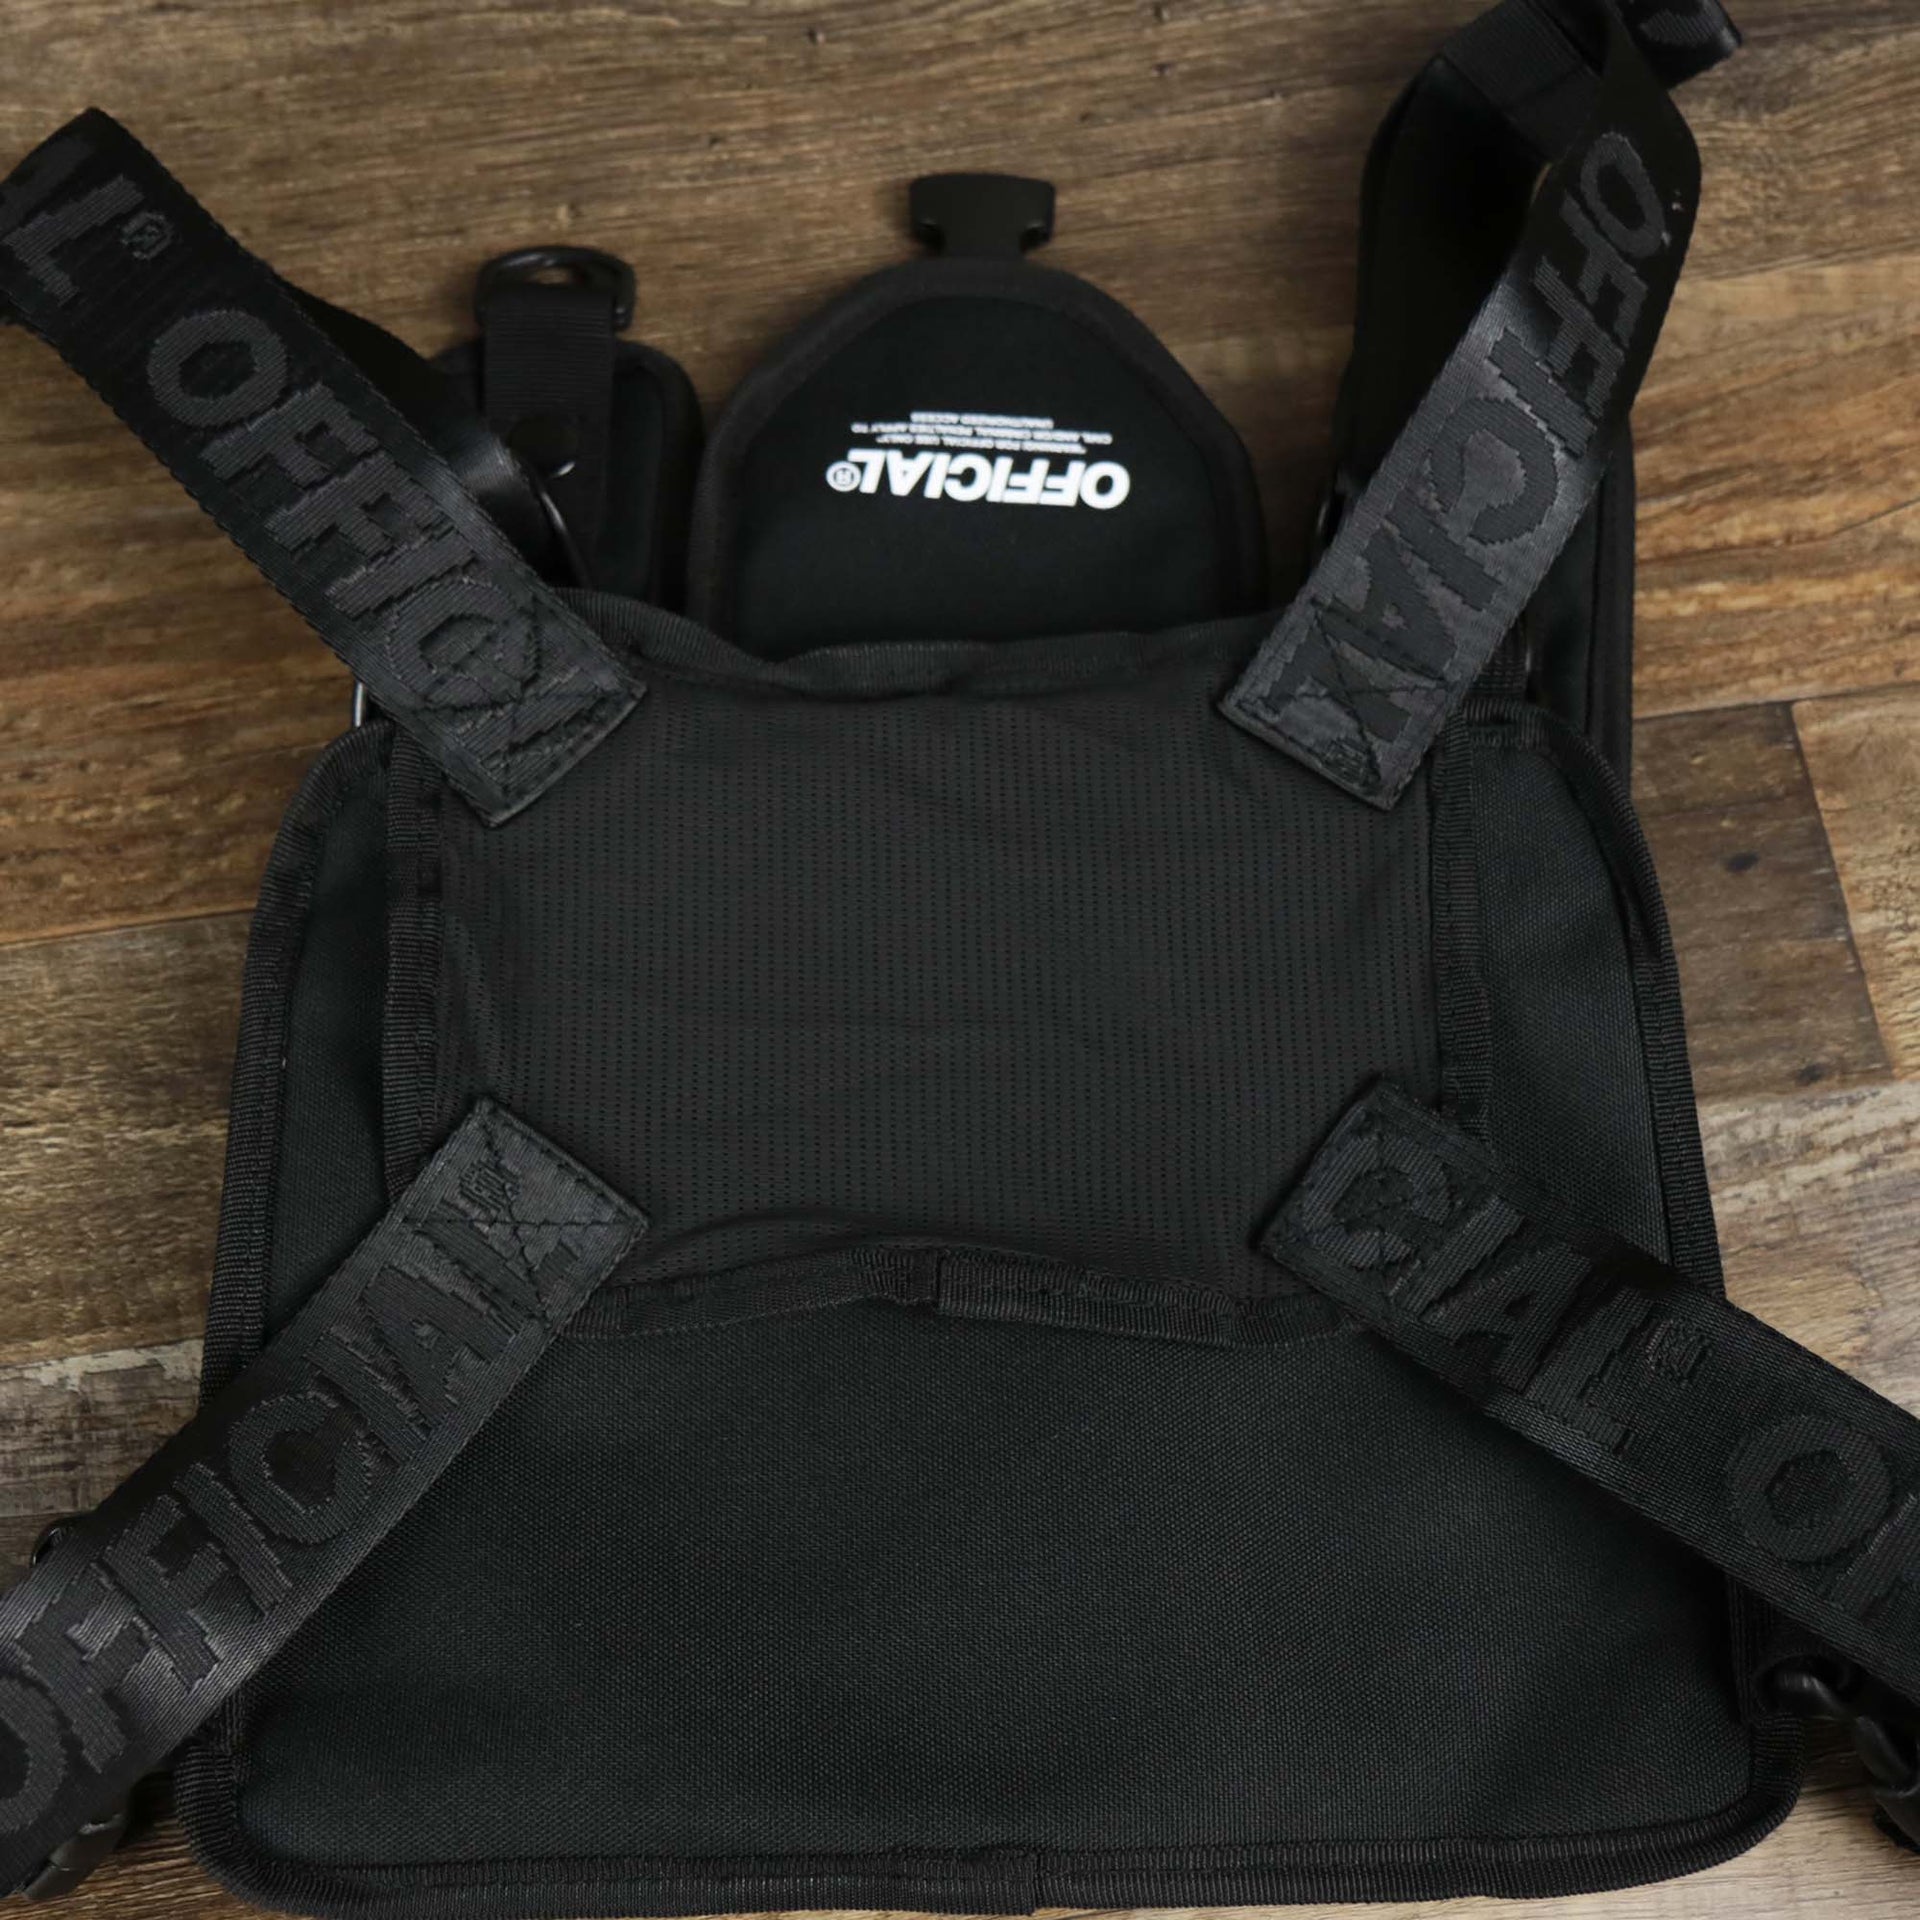 The backside of the Streetwear Tactics Chest Bag Utility Vest | Official Black